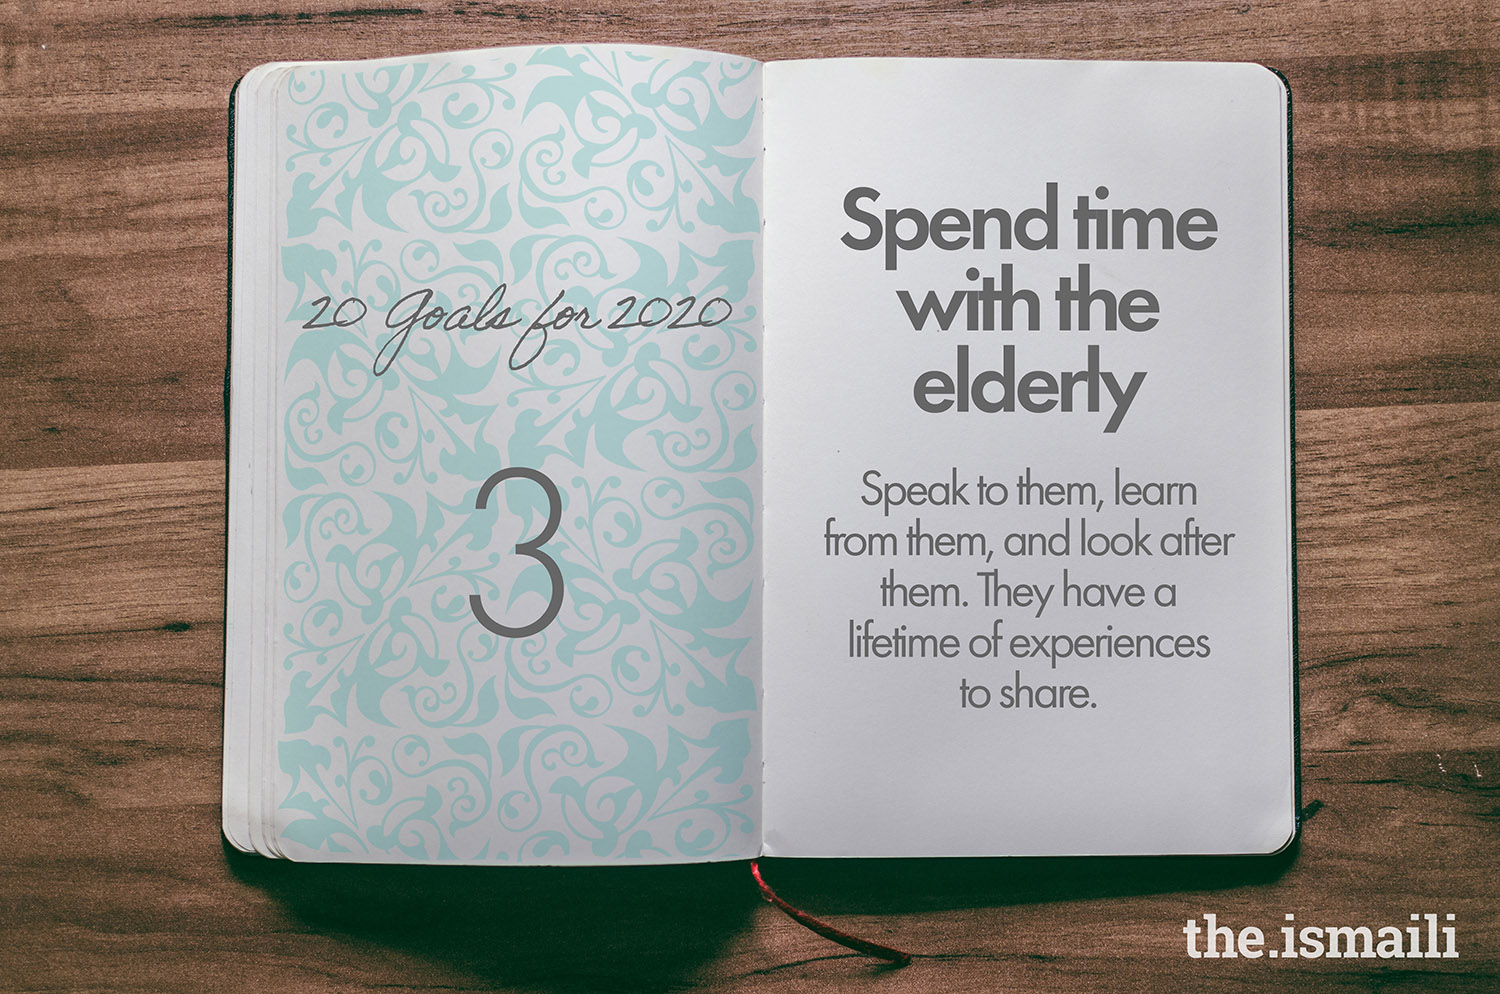 Goal 3: Spend time with the elderly